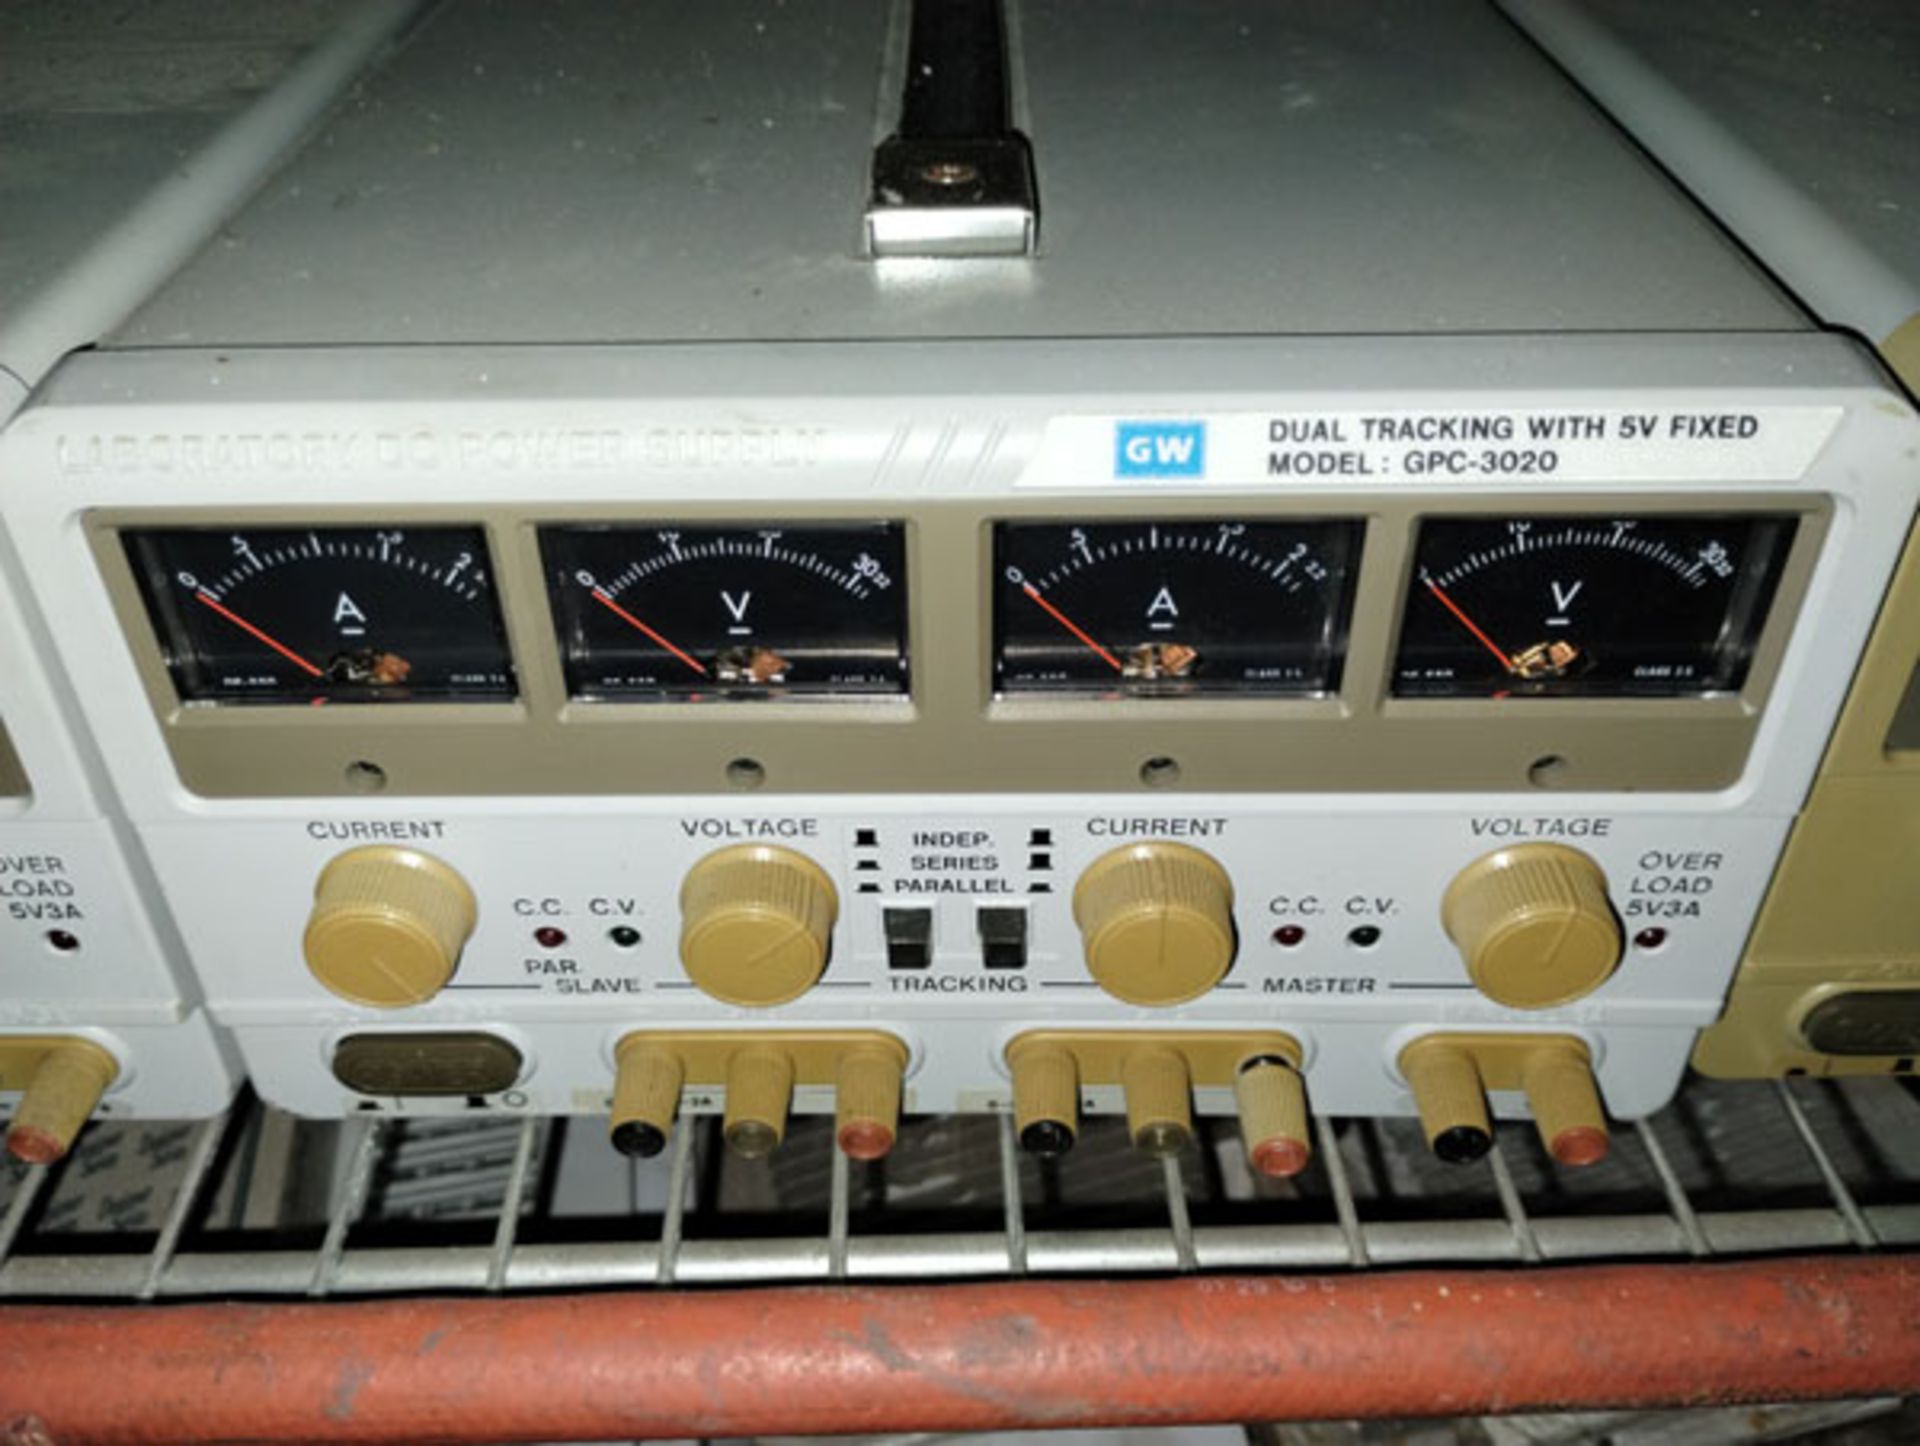 LOT OF 4 GW LABORATORY DC POWER SUPPLIES WITH DUAL TRACKING WITH 5V FIXED MODEL: GPC-3020 - Image 3 of 7